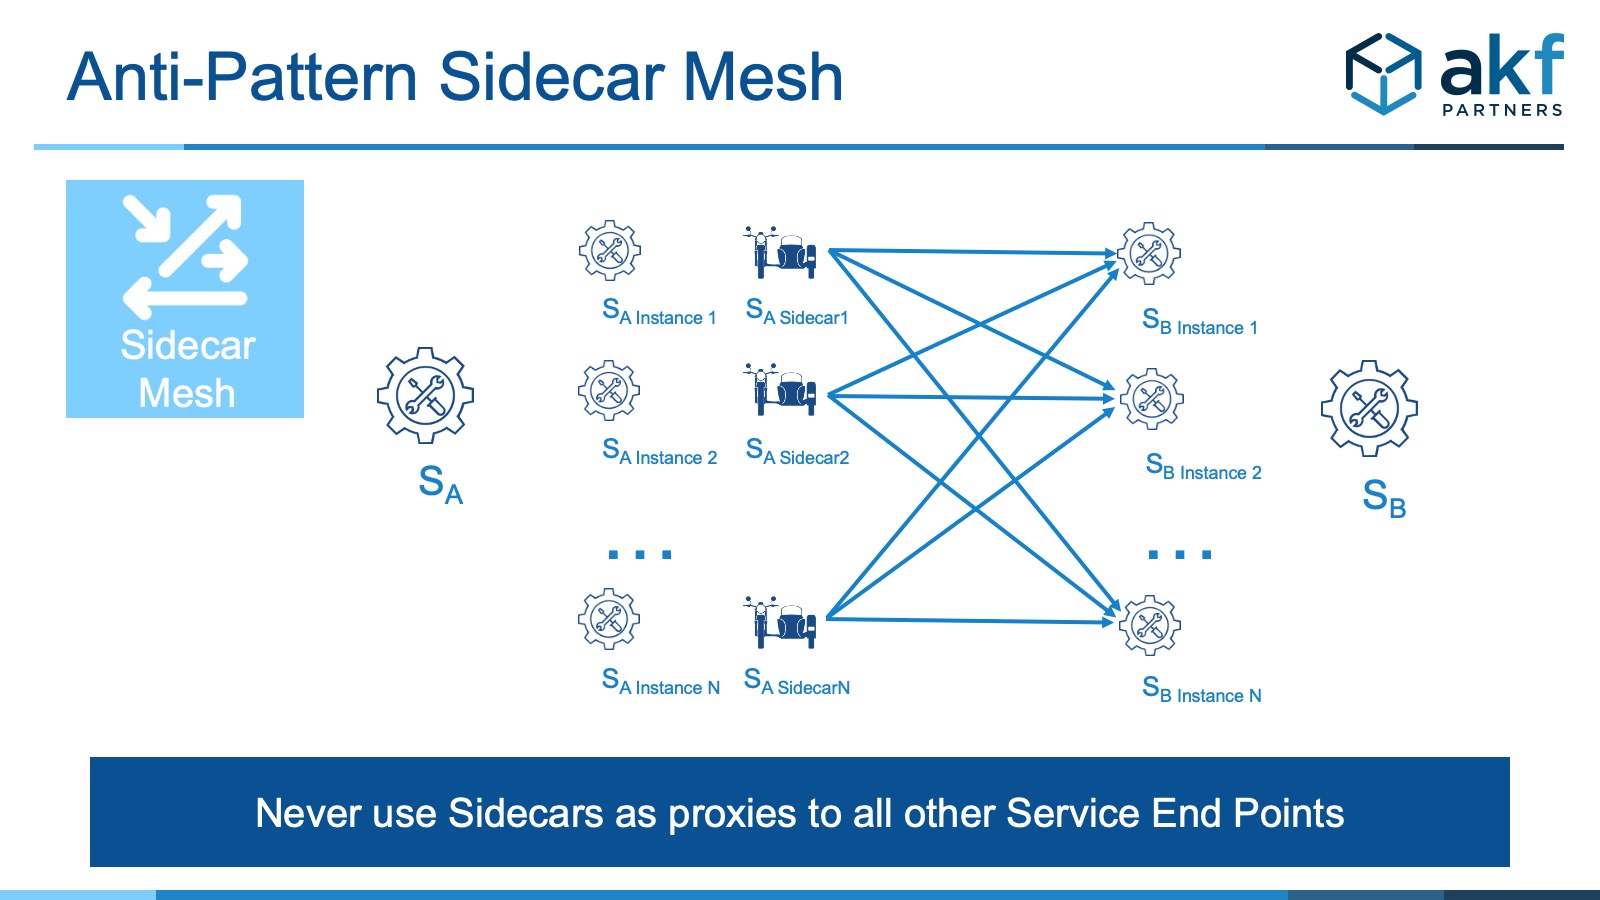 Sidecar is useful for several components but do not use it for allowing every endpoint to communicate to every other endpoint